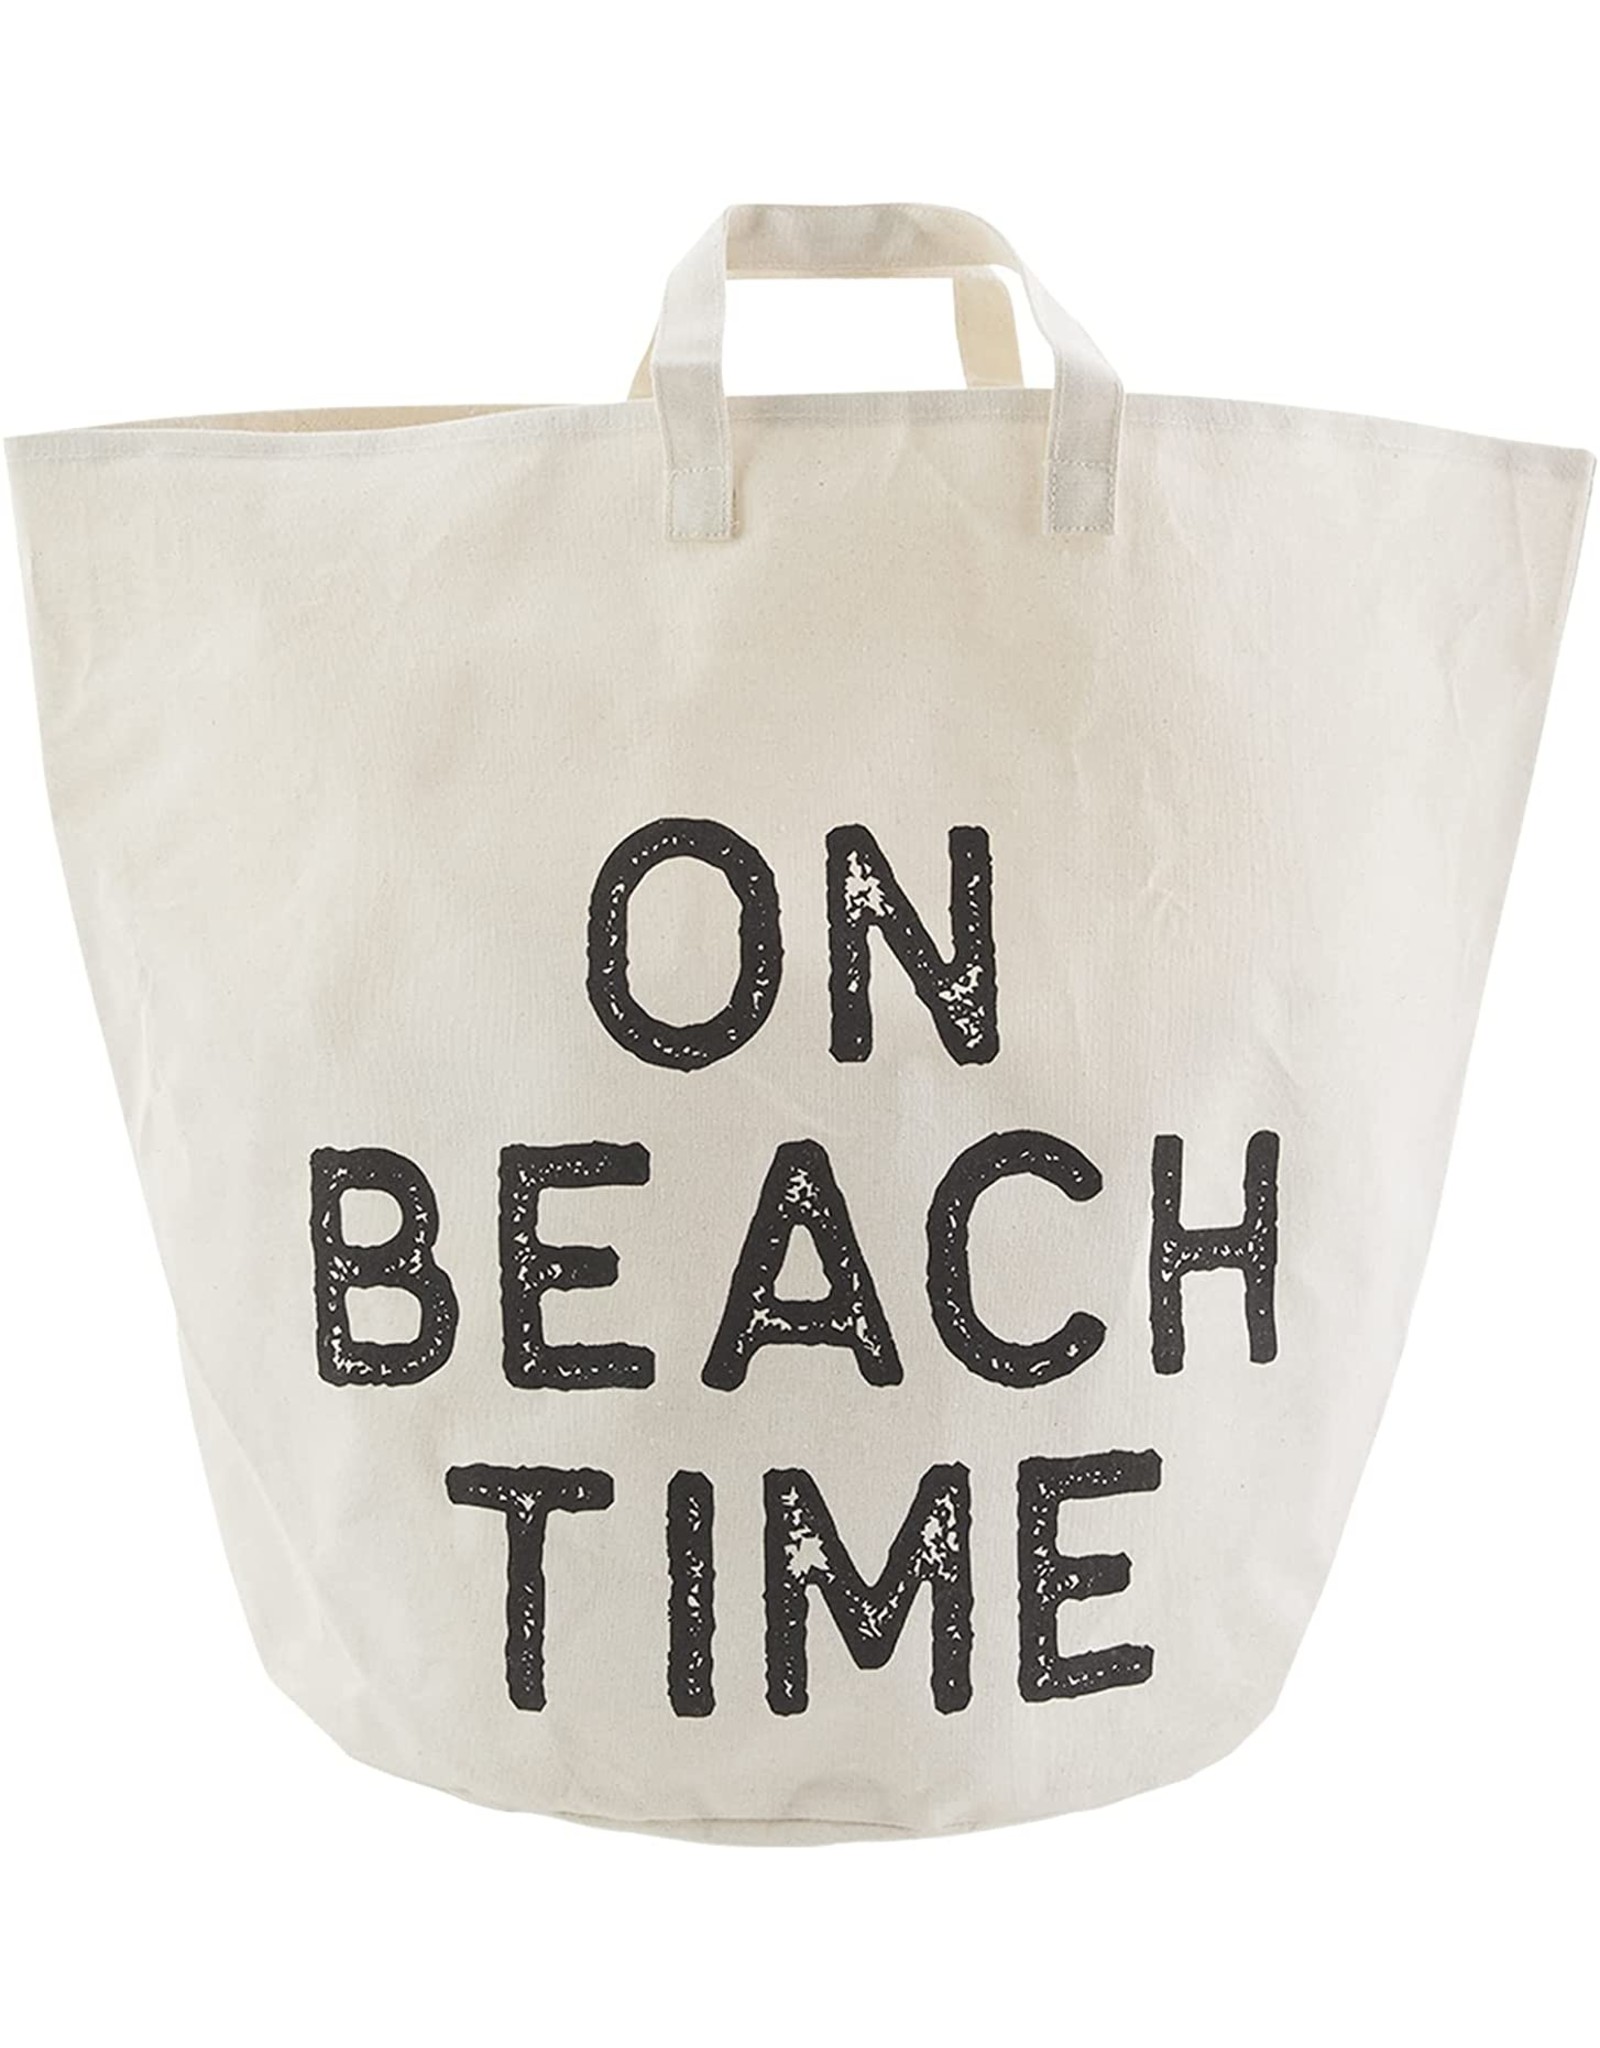 Mud Pie ON BEACH TIME Oversized Canvas Tote Beach Bag